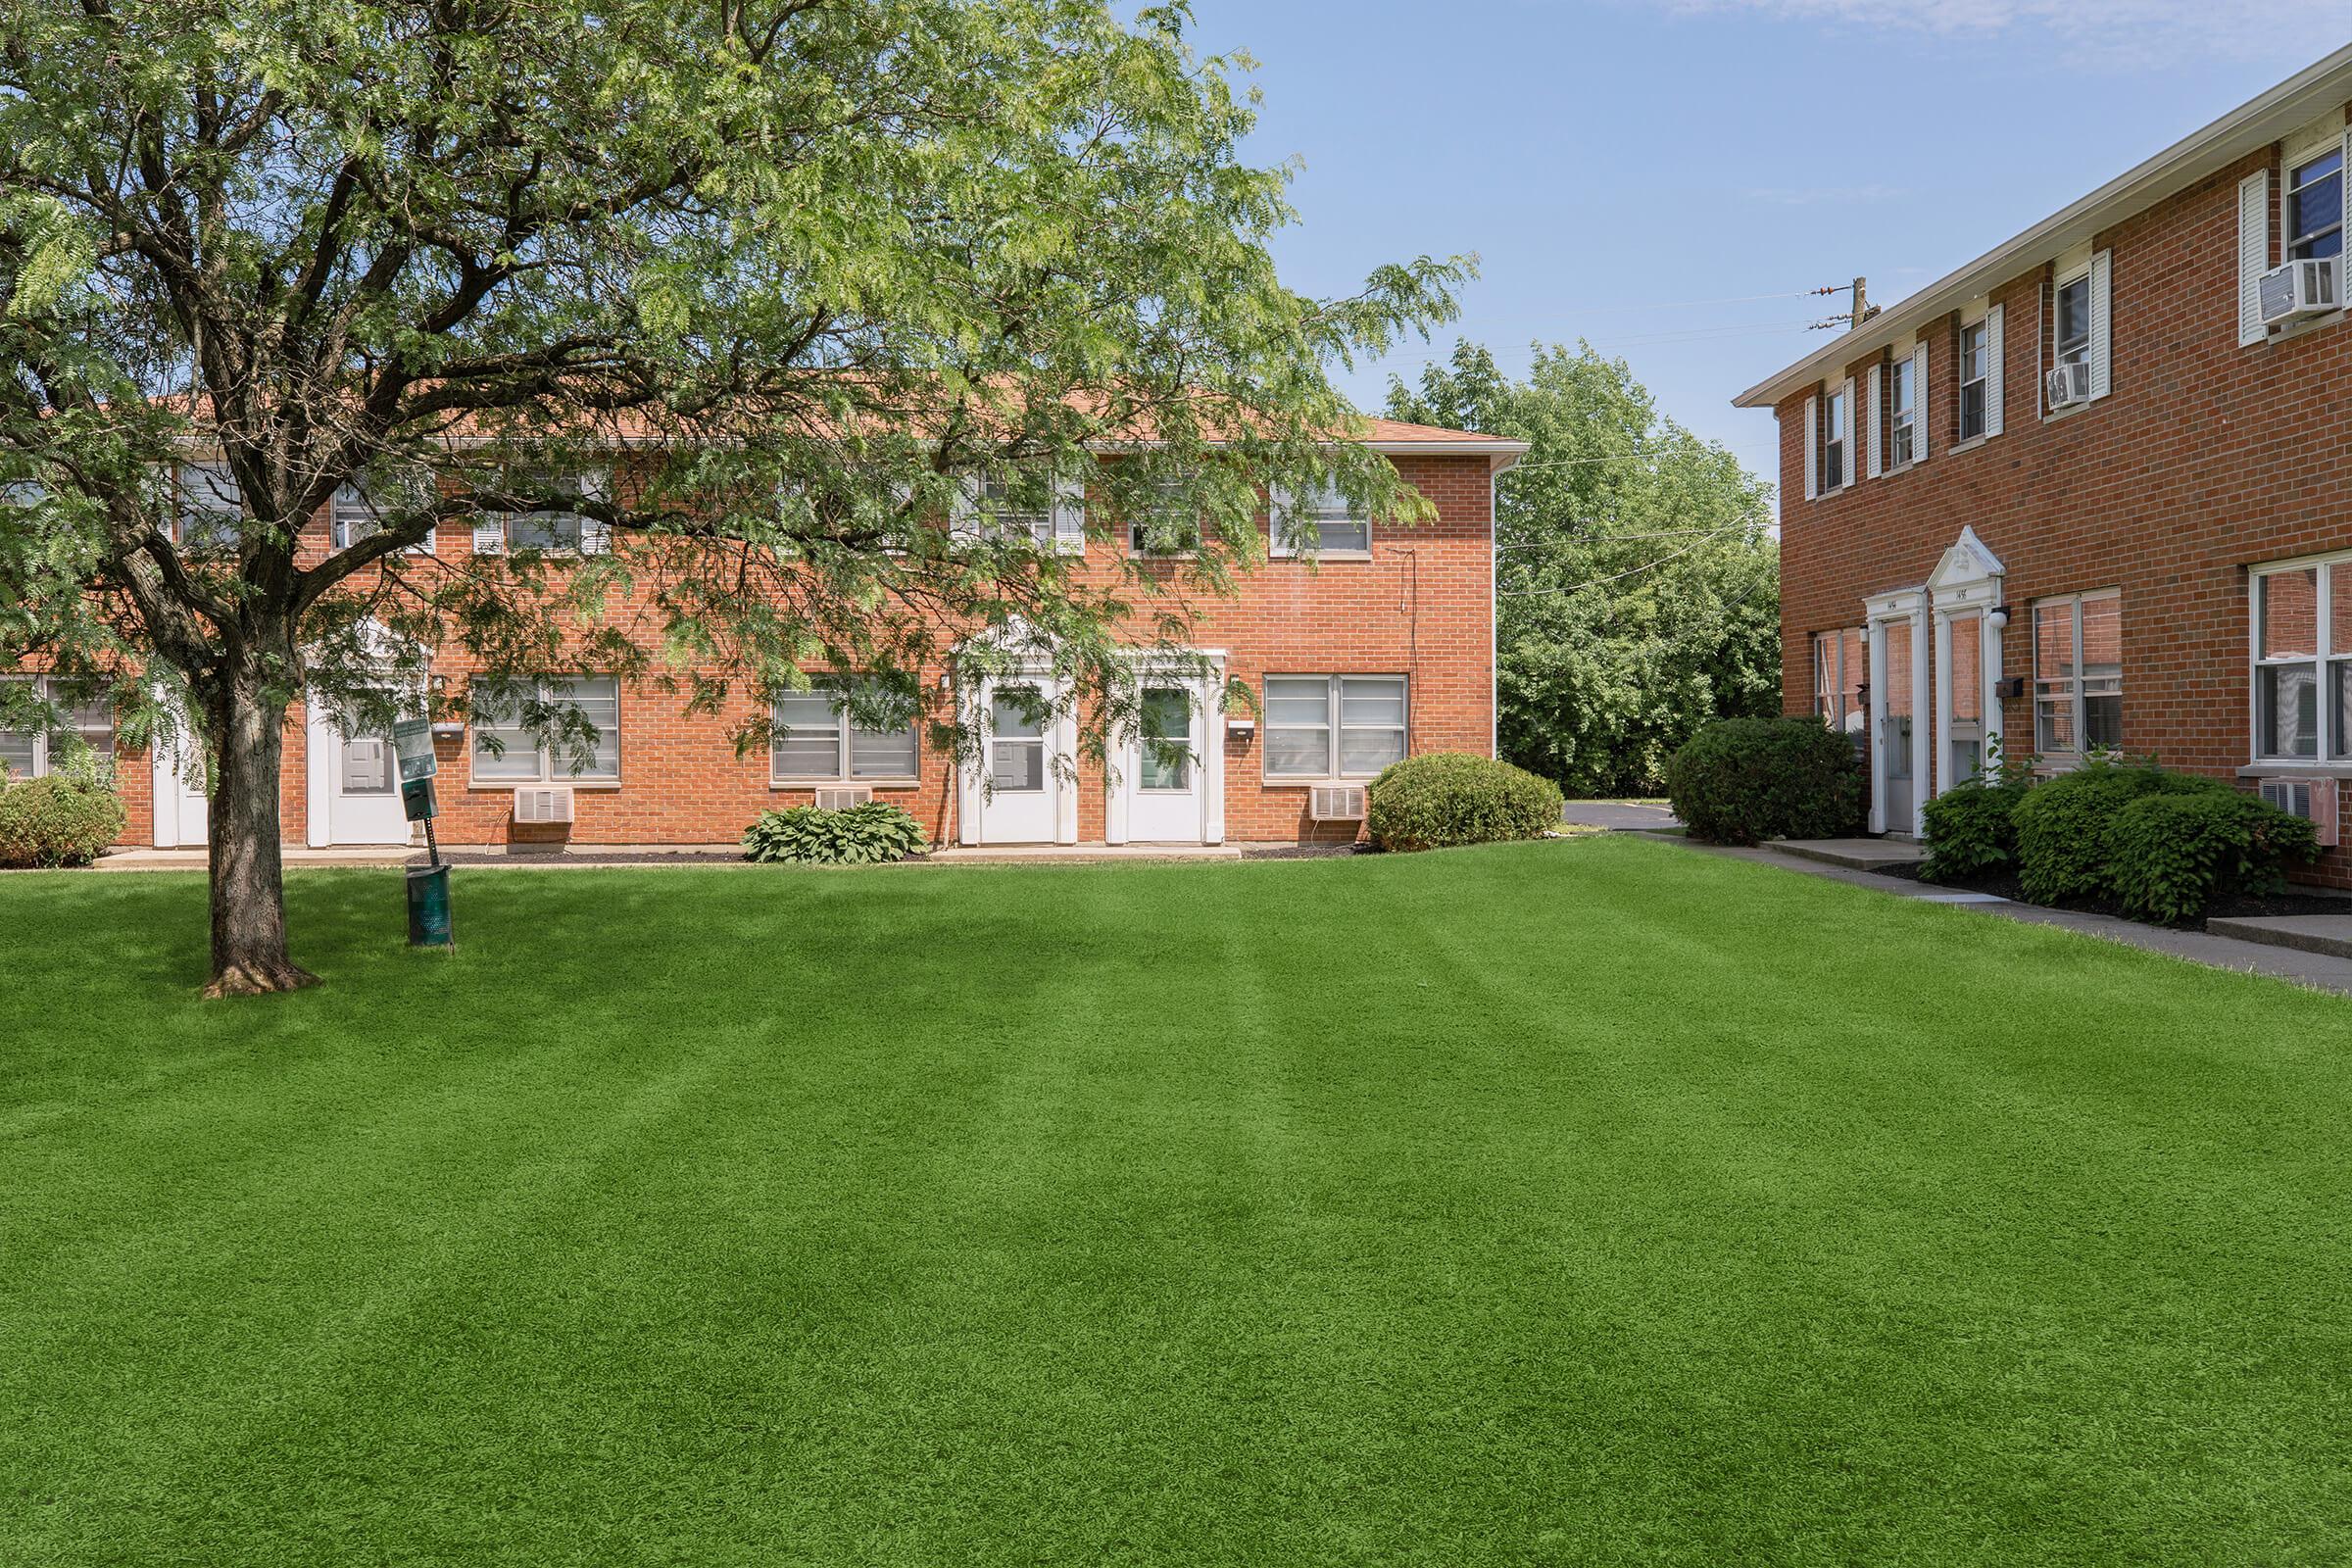 a large lawn in front of a brick building